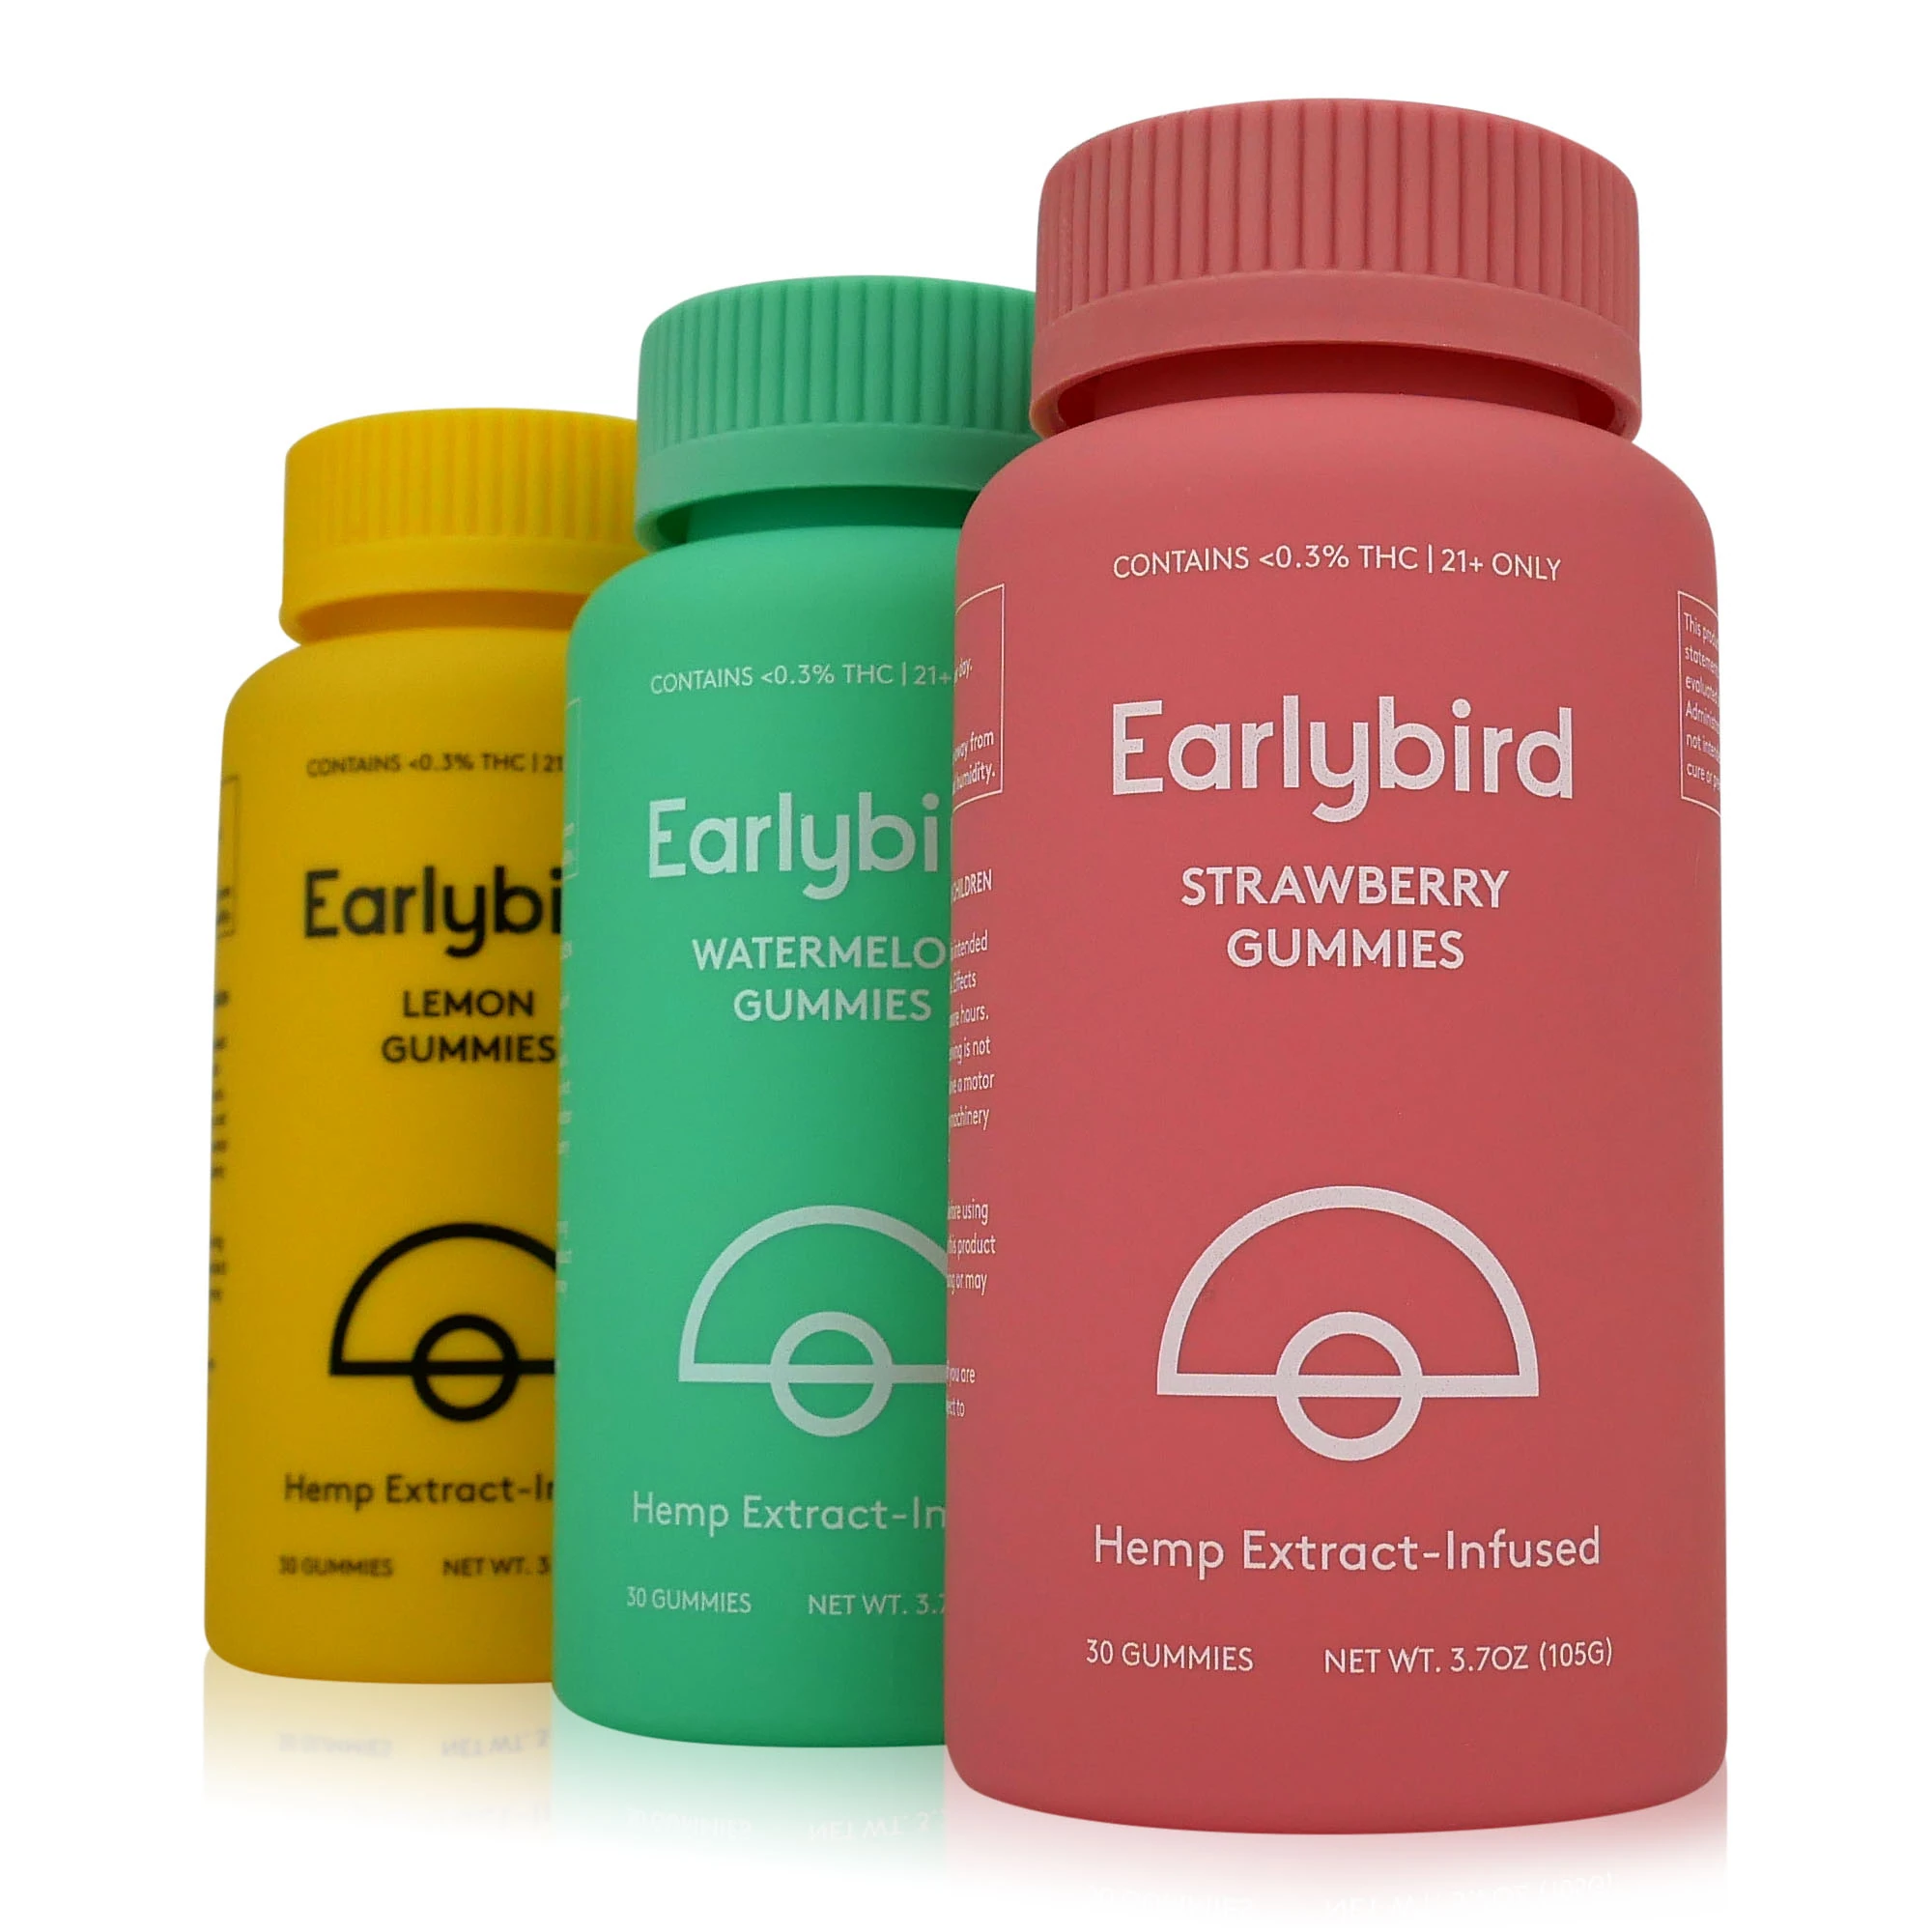 Earlybird CBD Gummies For Pain Relief - Free Shopping & 15% Off